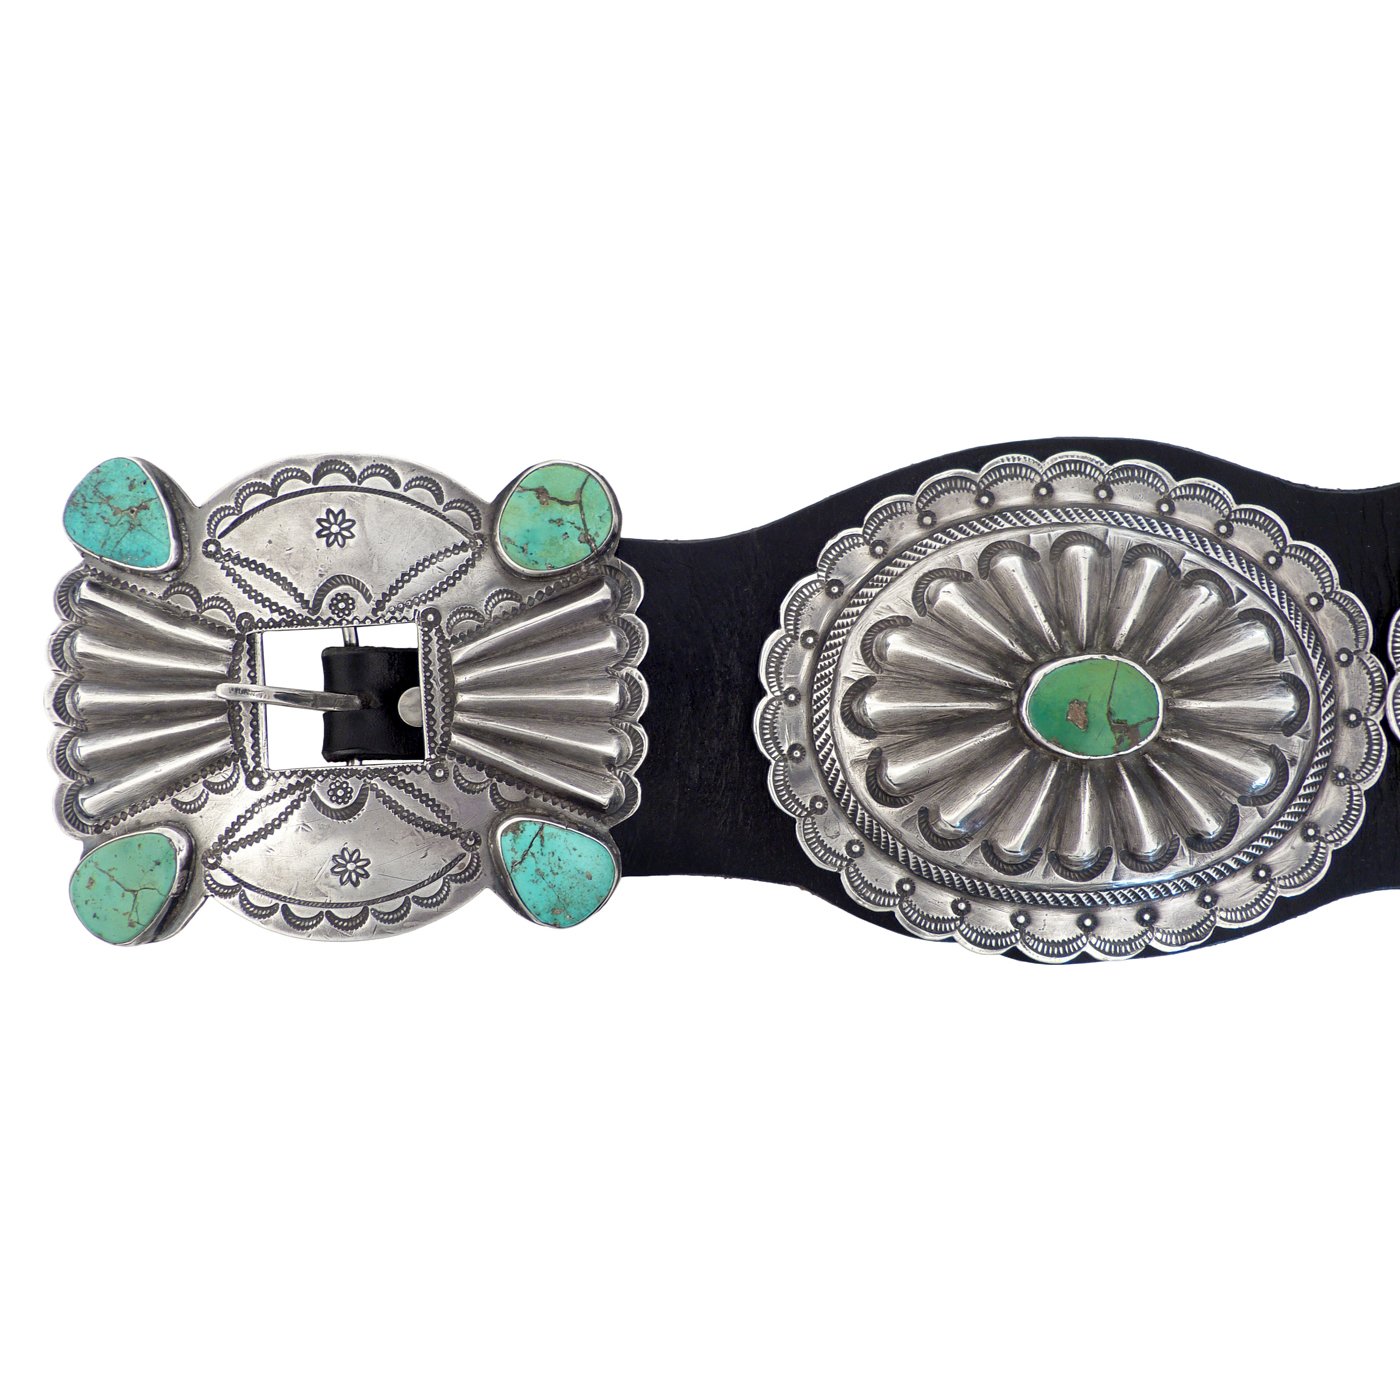 Navajo Stamped Silver Concho Belt with Seven Conchas and Turquoise ...